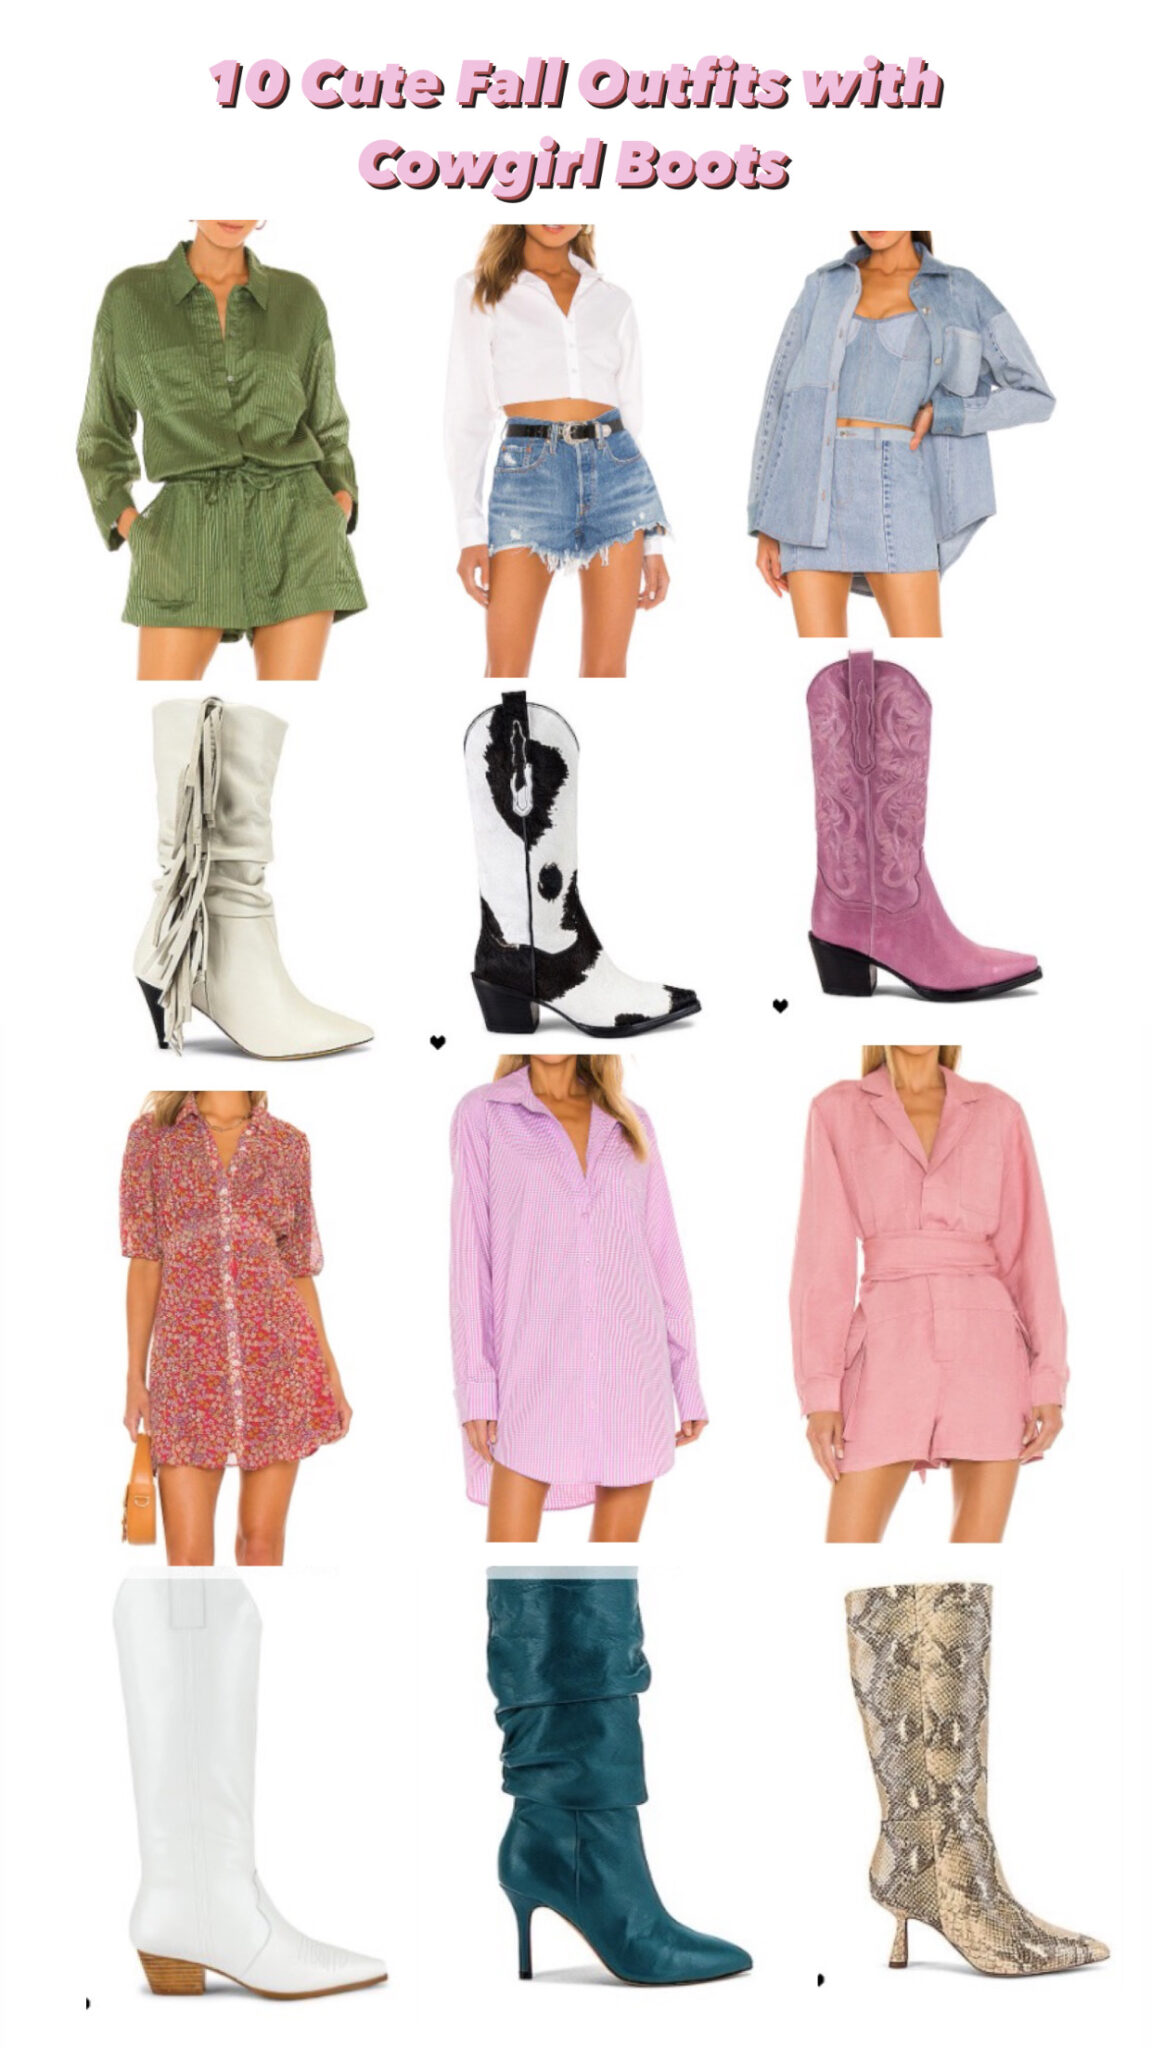 Cowboy Boots Outfits